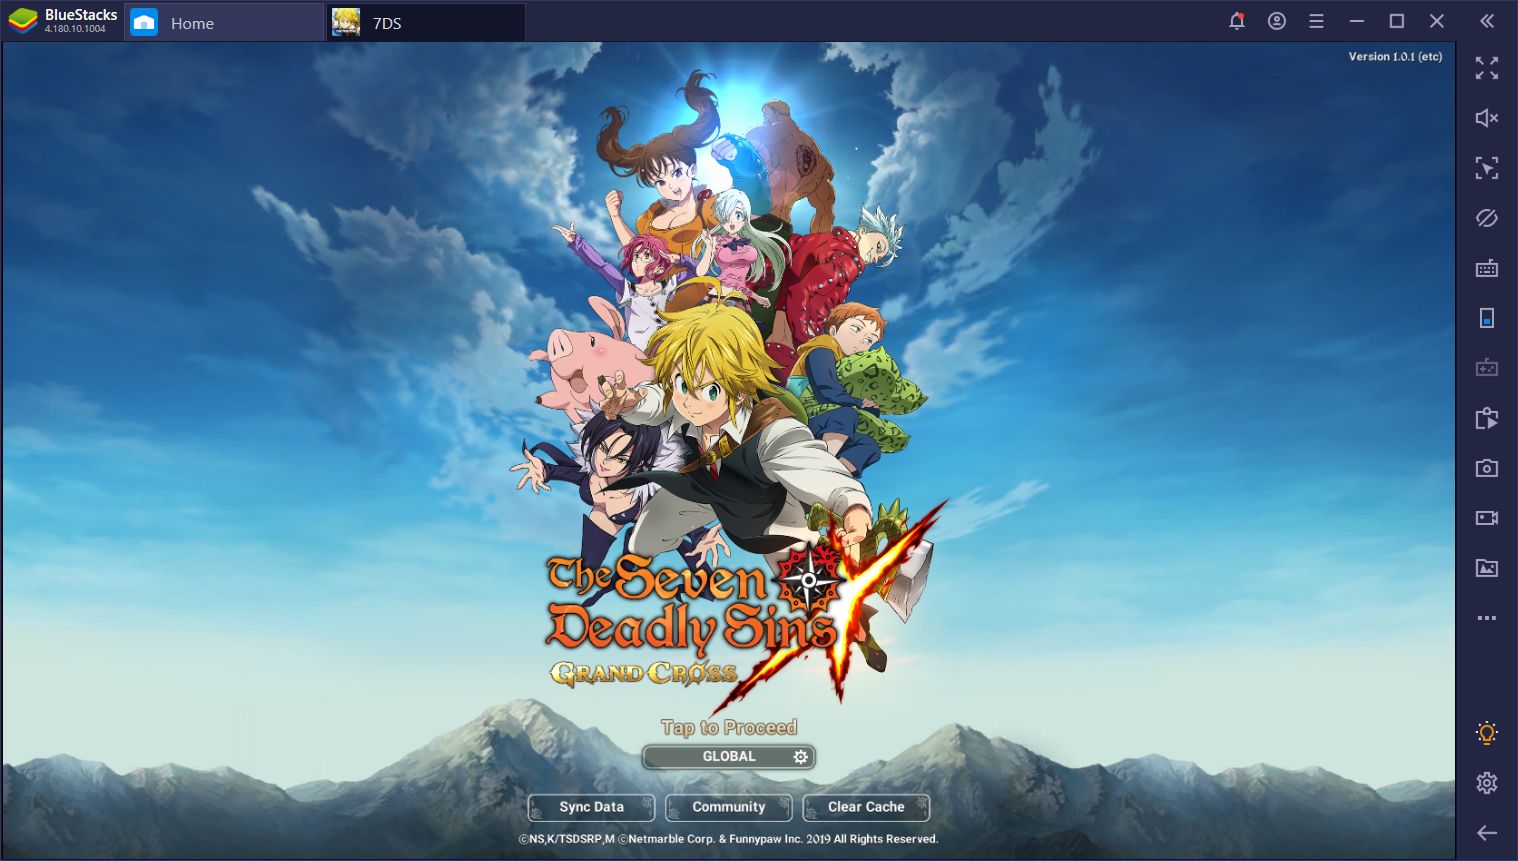 Play The Seven Deadly Sins: Grand Cross in the Glorious Landscape Mode Now on BlueStacks